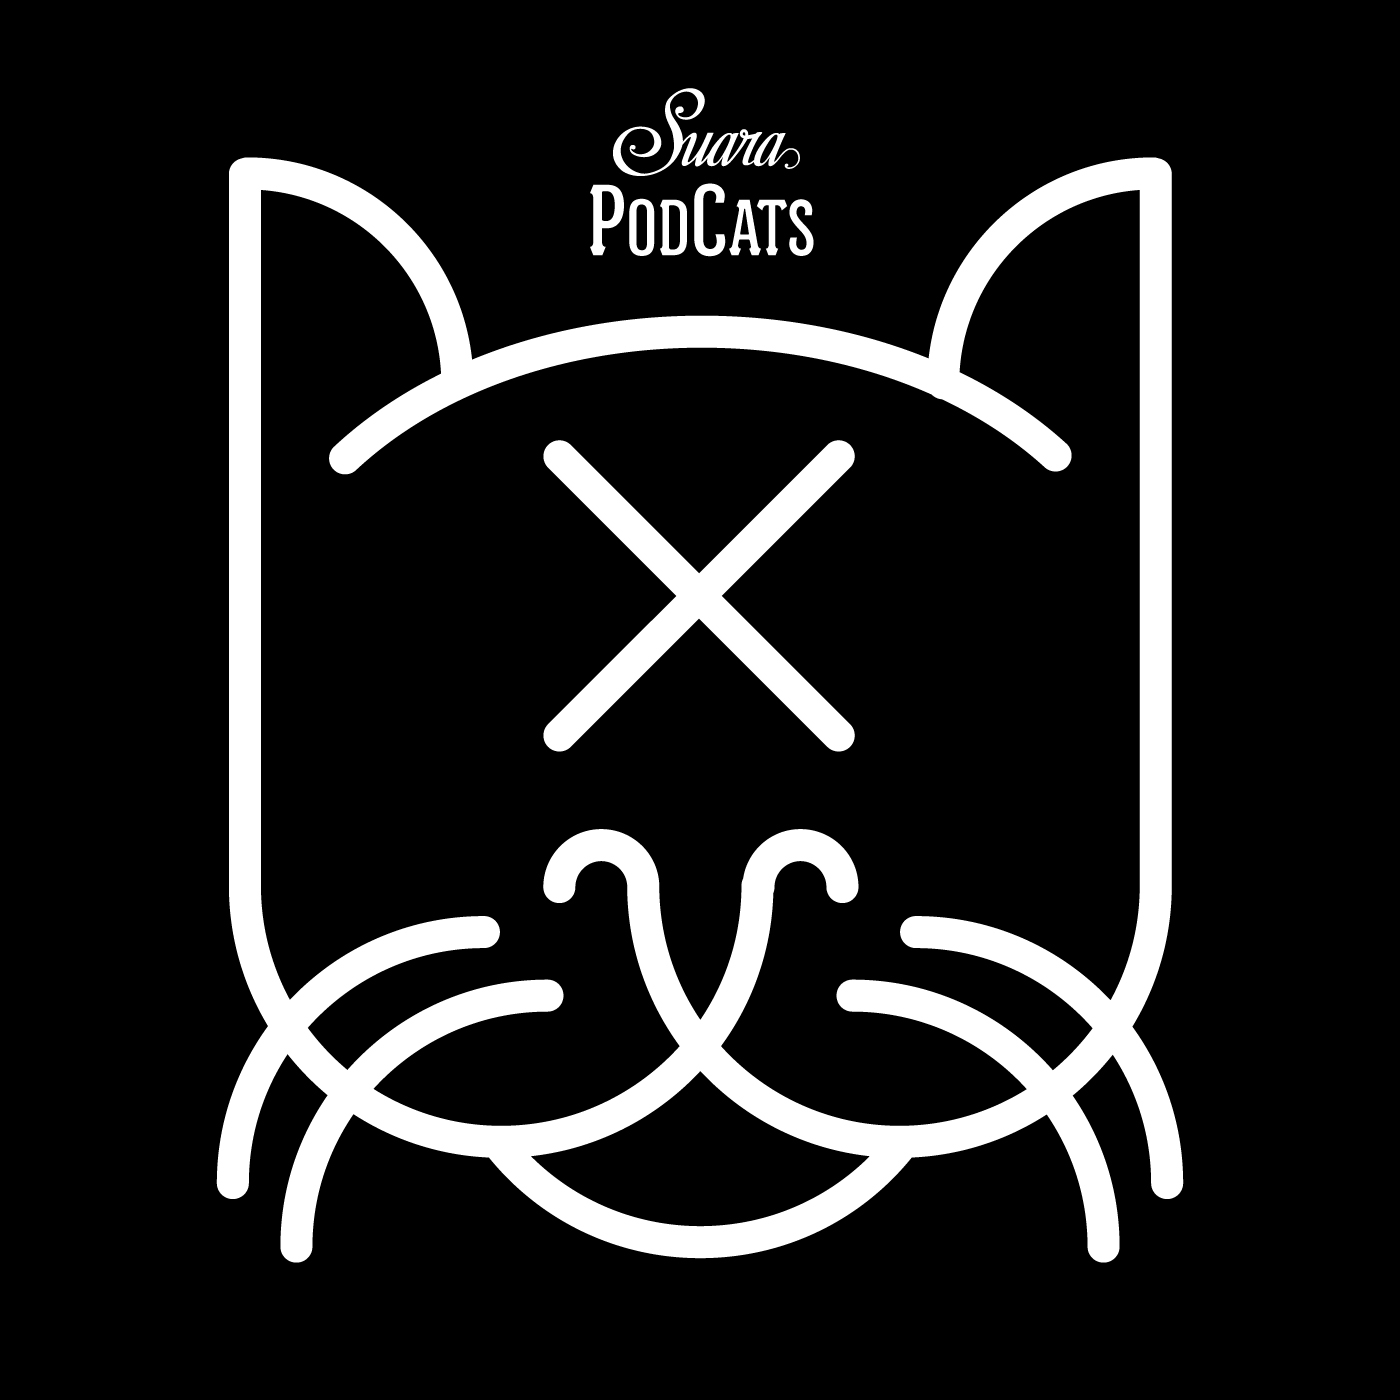 Delta Podcasts - Suara PodCats by Coyu (28.05.2018)